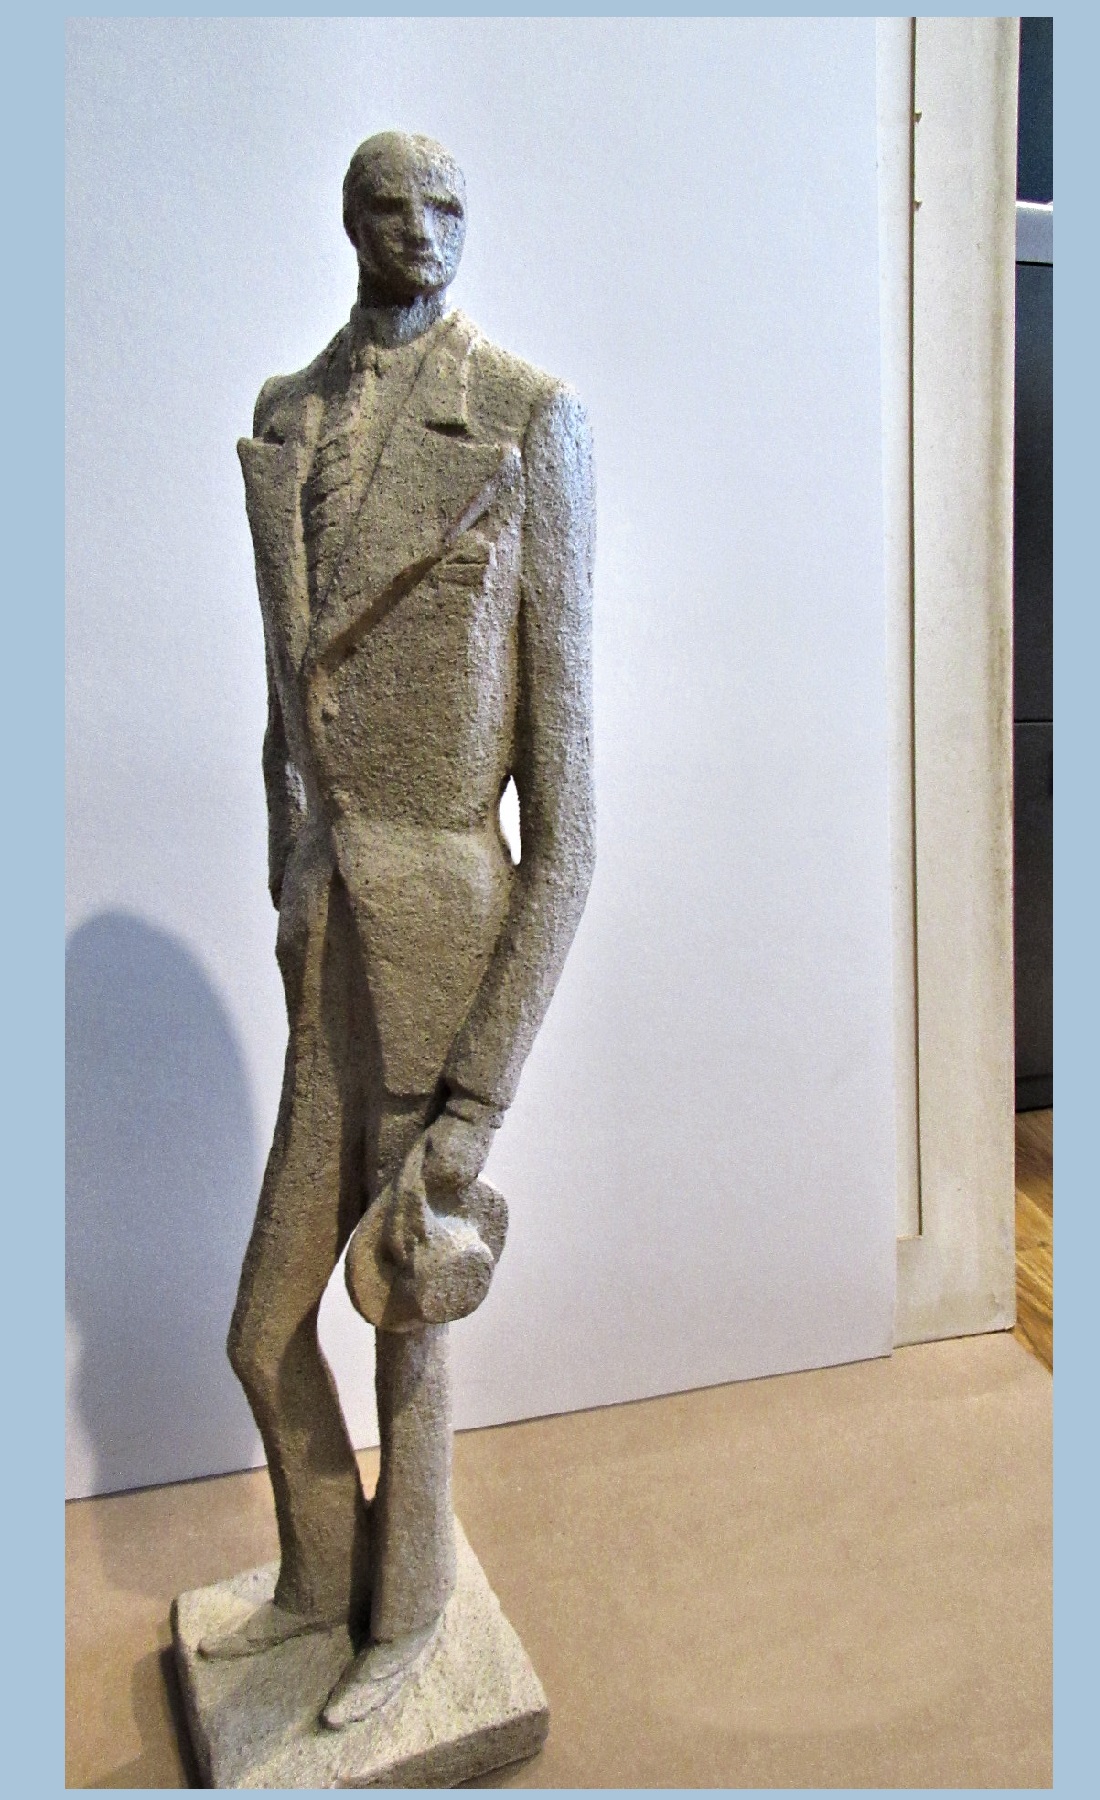 Narrow and tall clay sculpture of a man